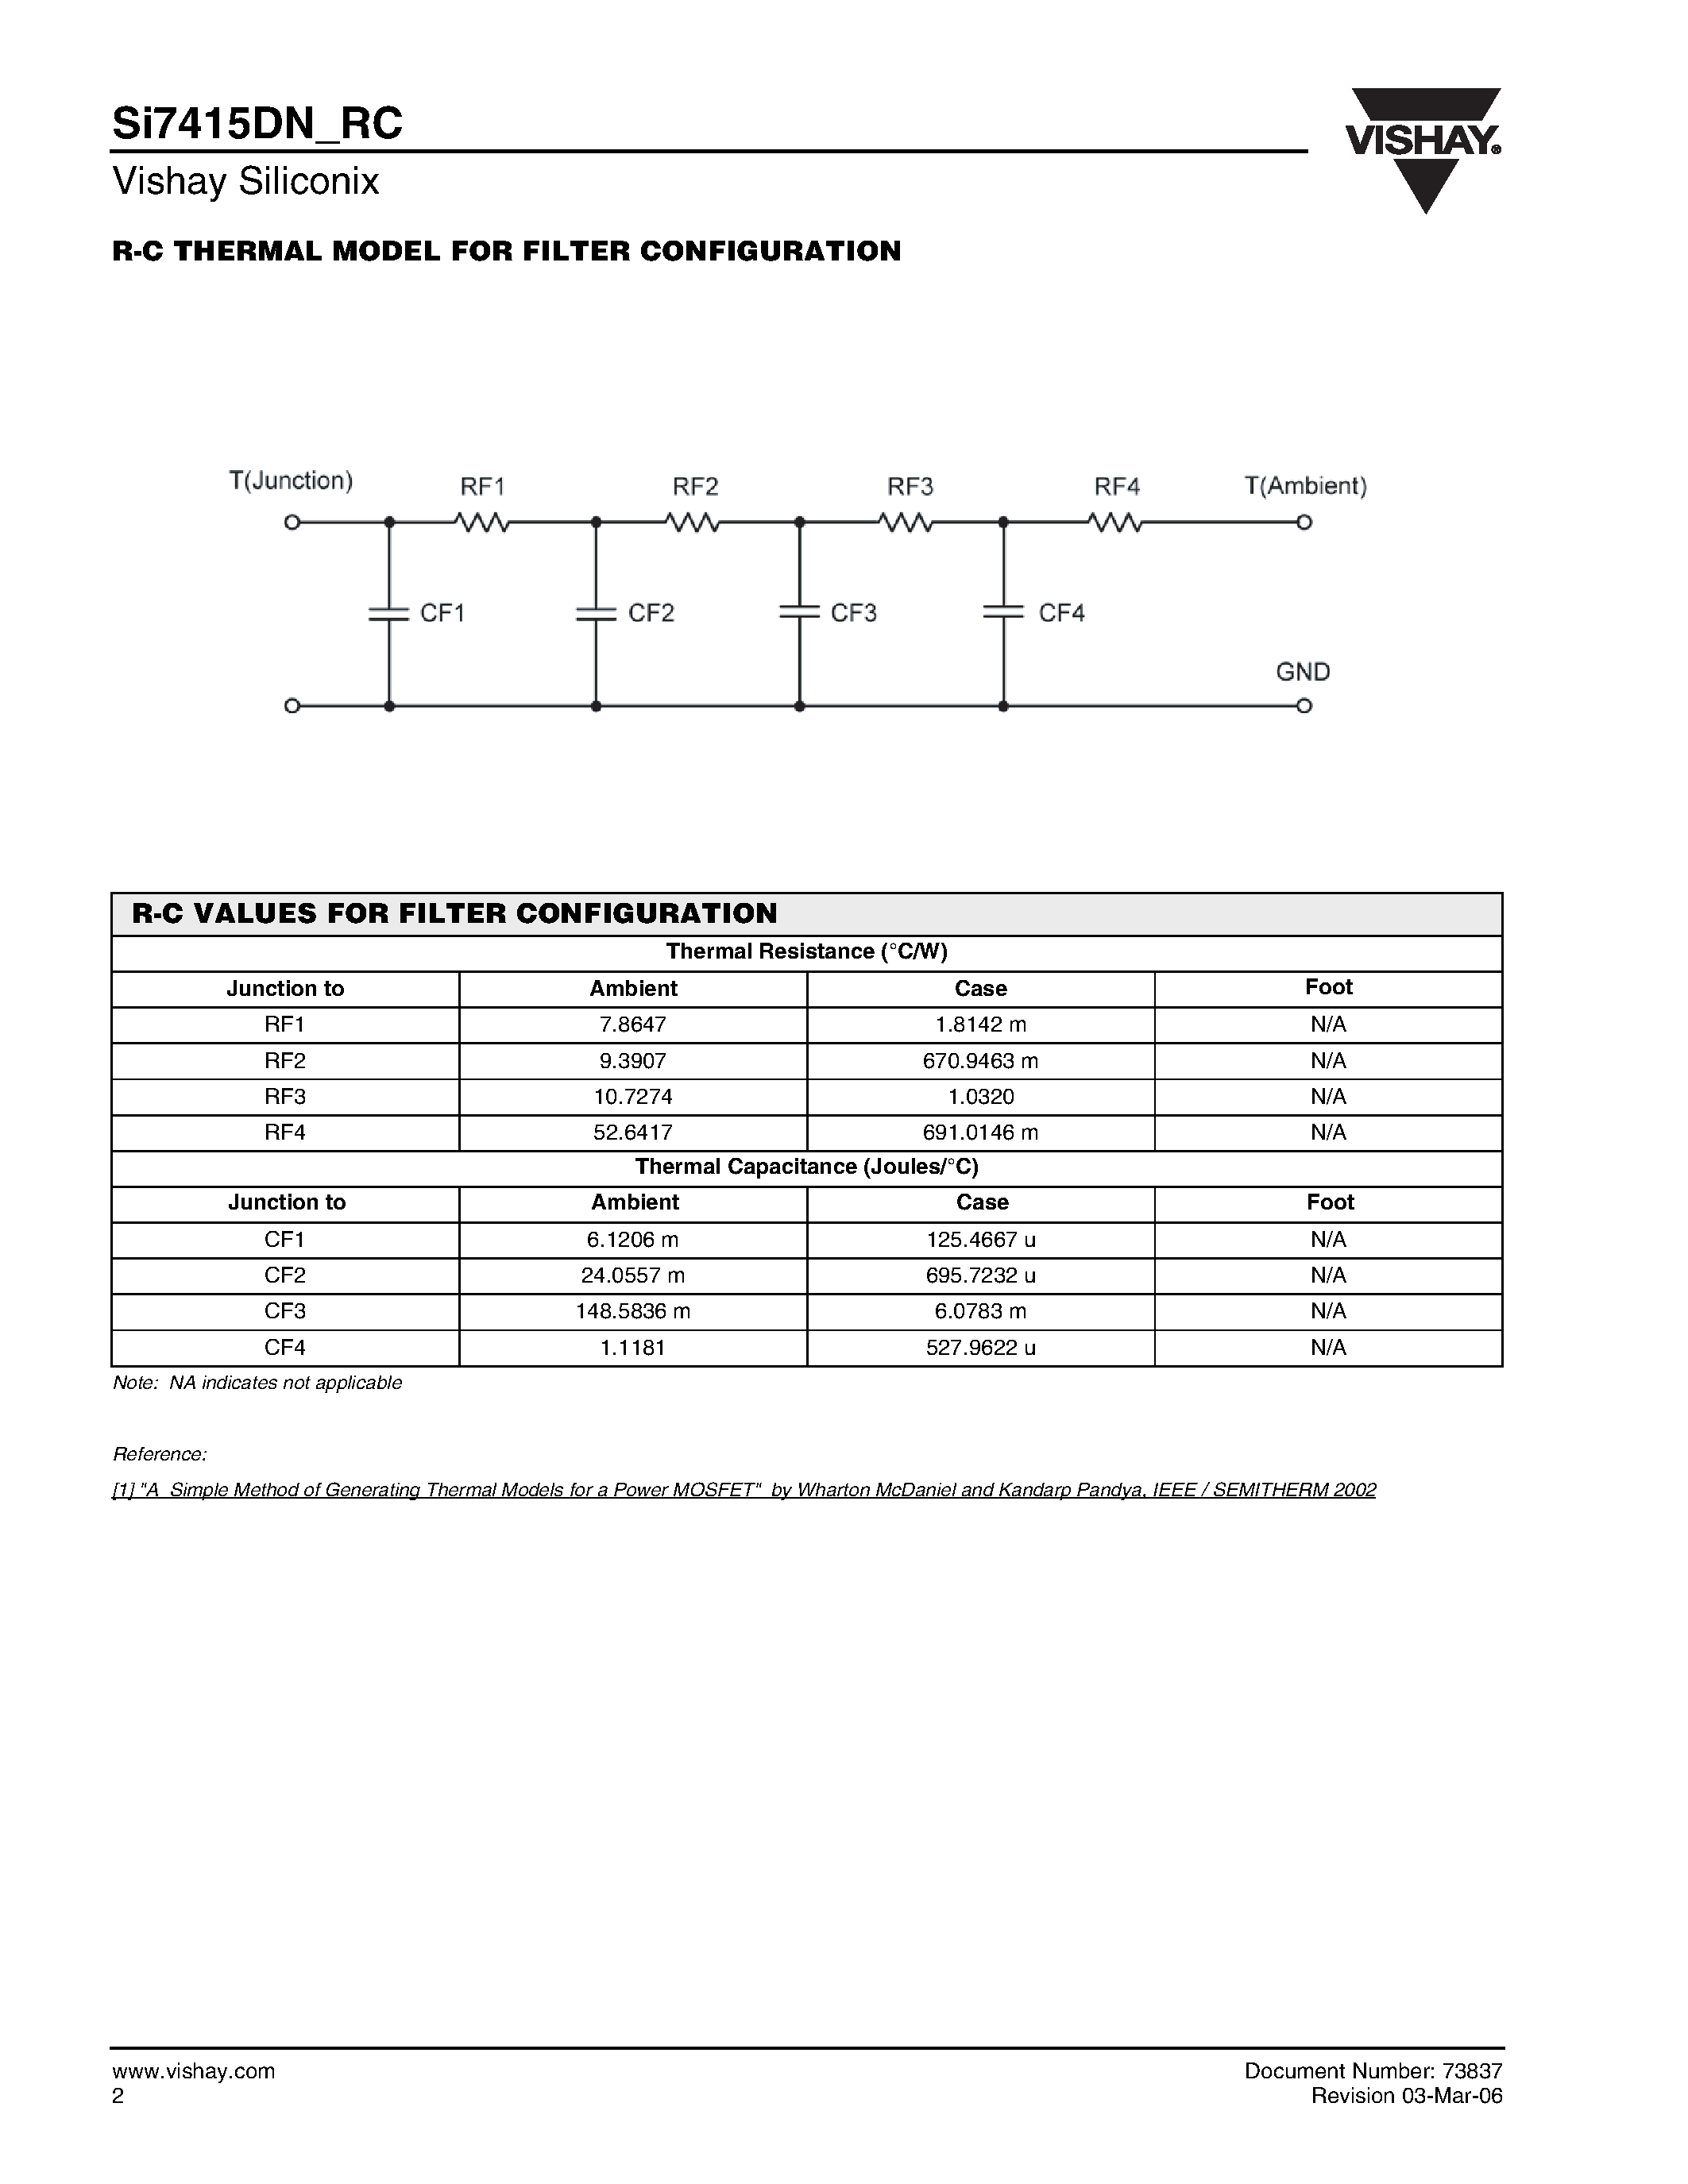 Datasheet SI7415DN-RC - R-C Thermal Model Parameters page 2